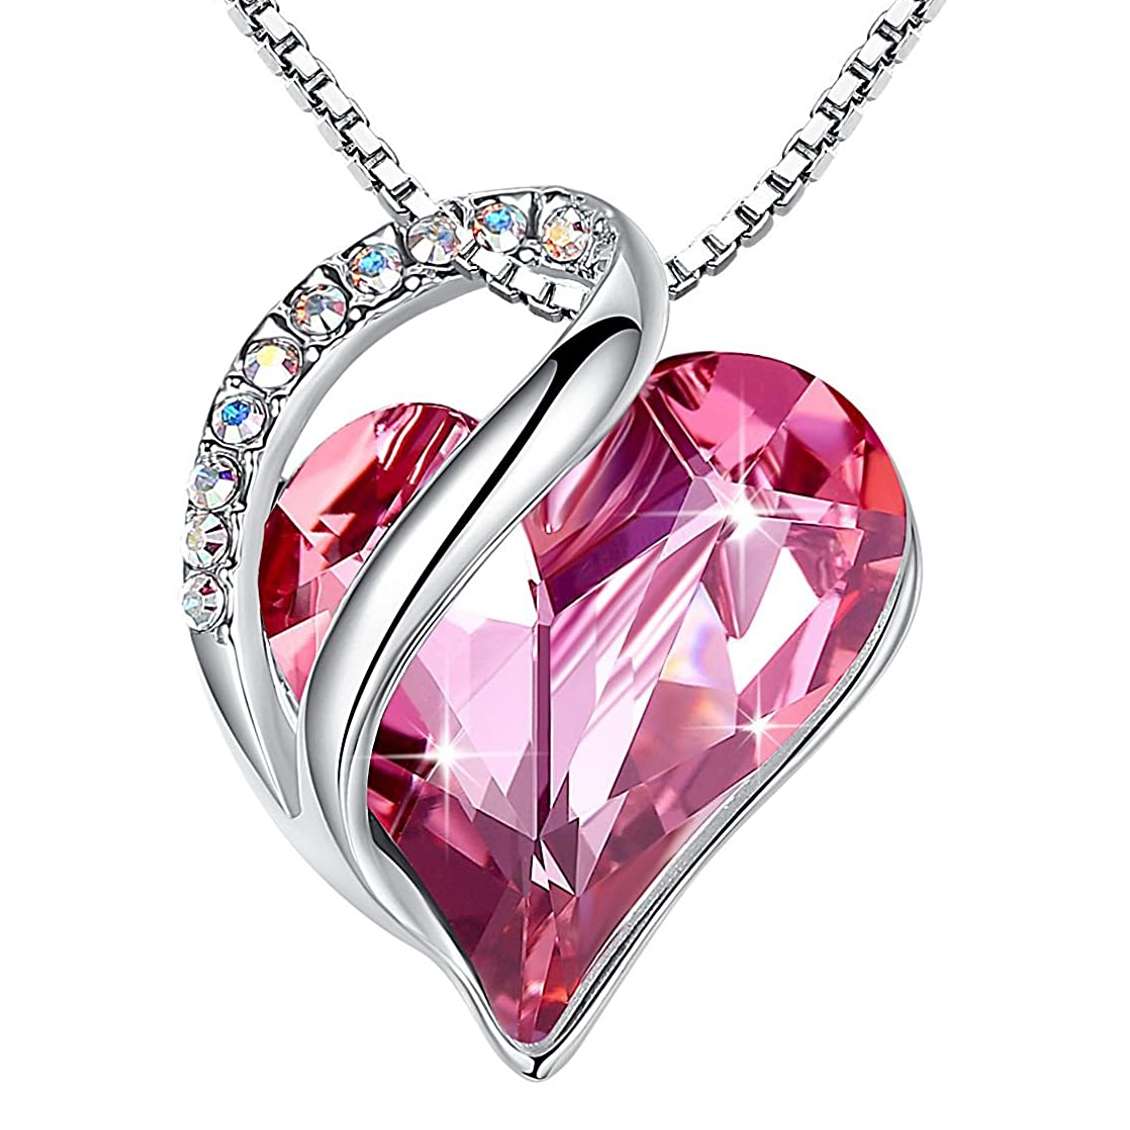 Heart Geometry Necklace 925 Sterling Silver Jewelry for Women Girlfriend Gift Anniversary Gift